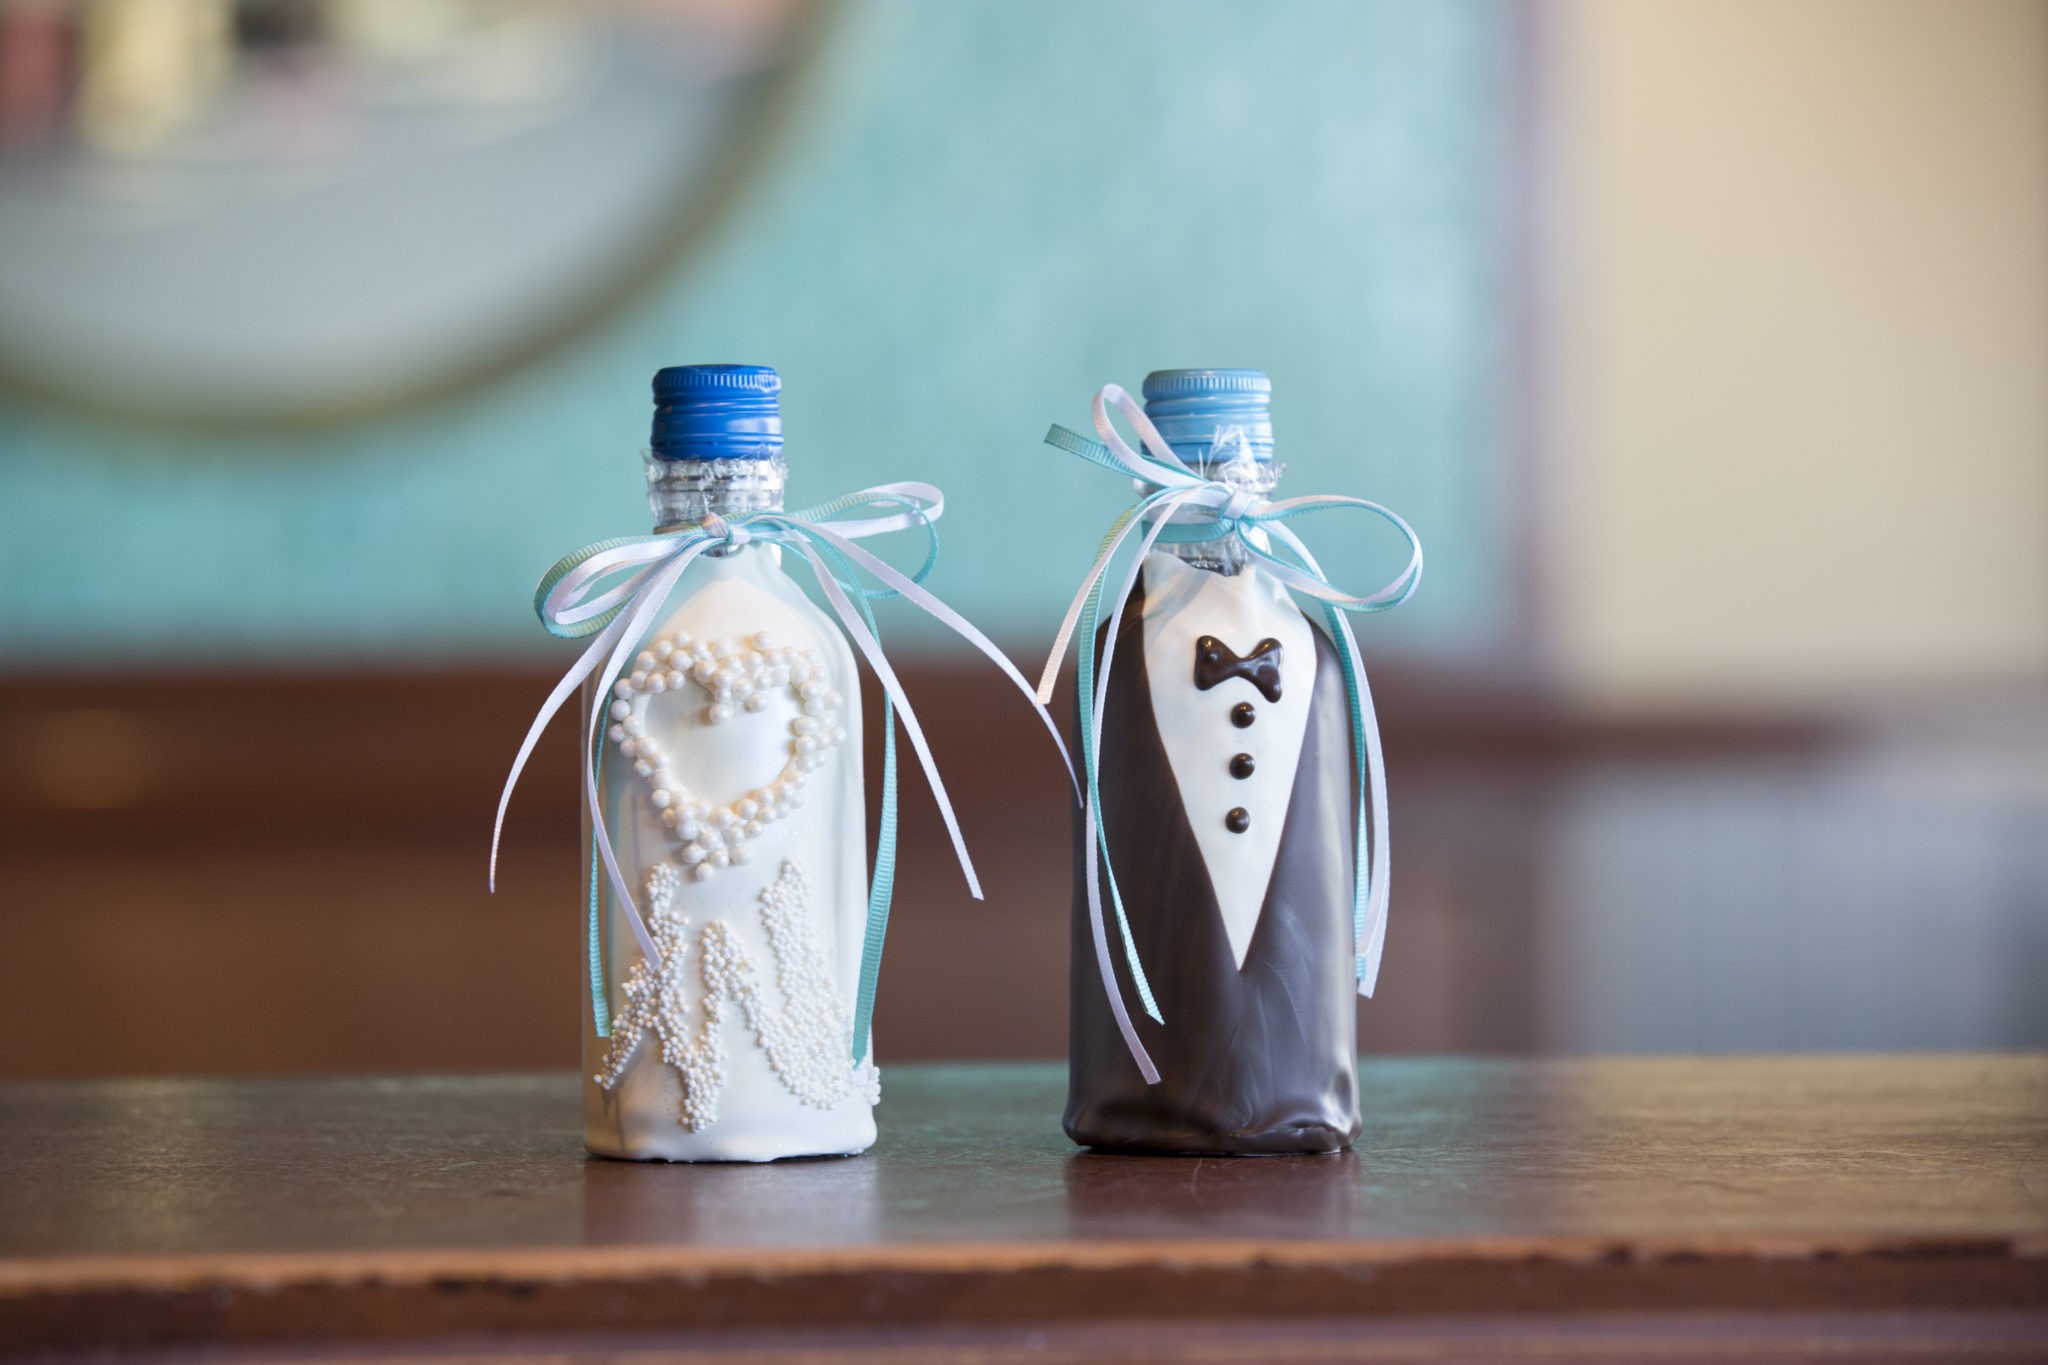 Two miniature bride and groom chocolate dipped wine bottles.